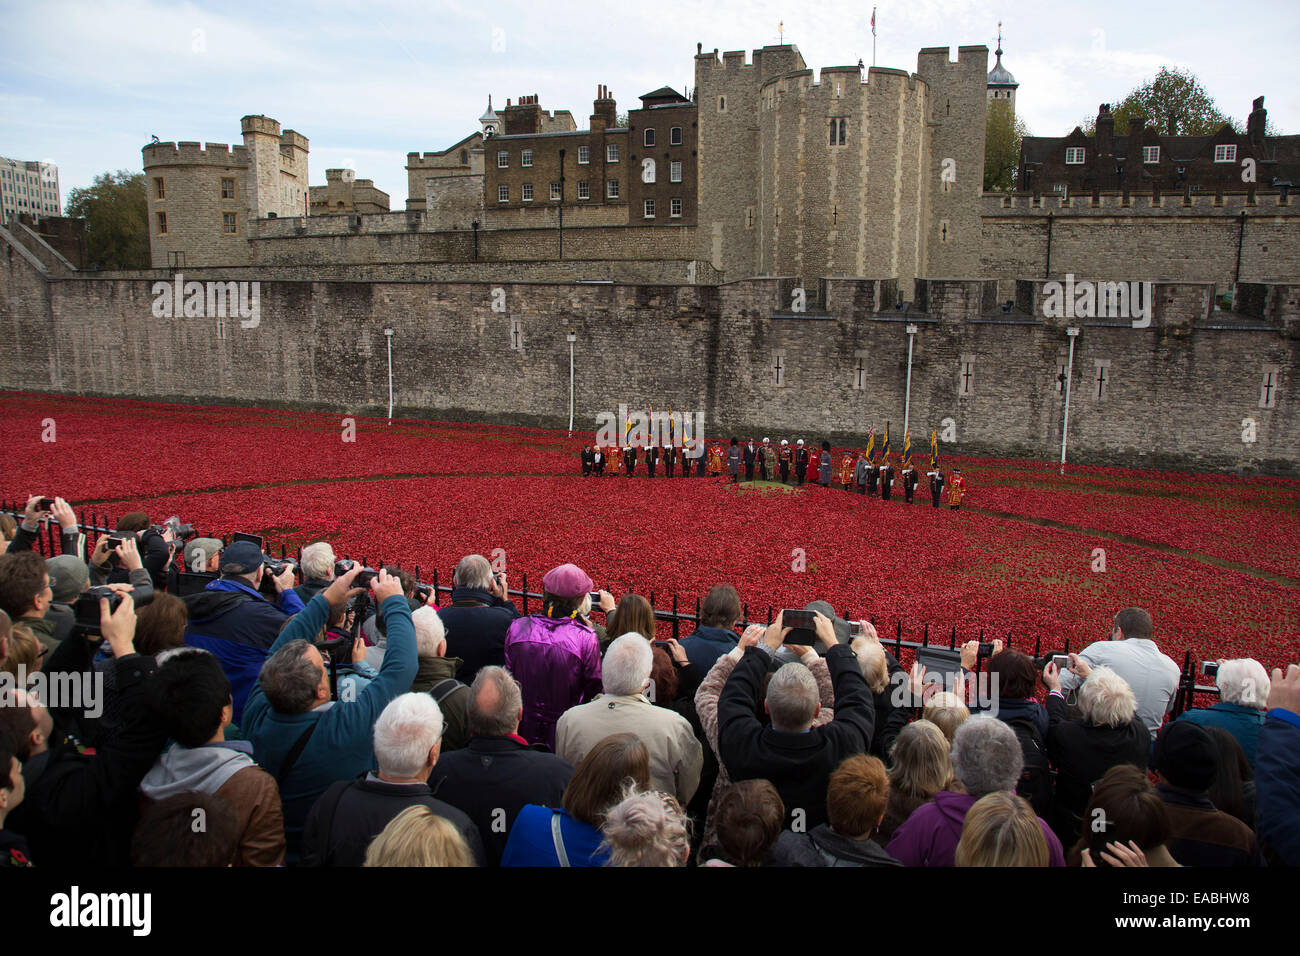 London, UK. 11th November, 2014. Crowds gather on Armistice Day to see the final poppy planted at the Tower of London, and to join in a two minute silence. 888,246 ceramic remebrance poppies have been planted. One for each life lost in the First World War. The installation has been made by Created by ceramic artist Paul Cummins, with setting by stage designer Tom Piper, and thousands of volunteers. Credit:  Michael Kemp/Alamy Live News Stock Photo